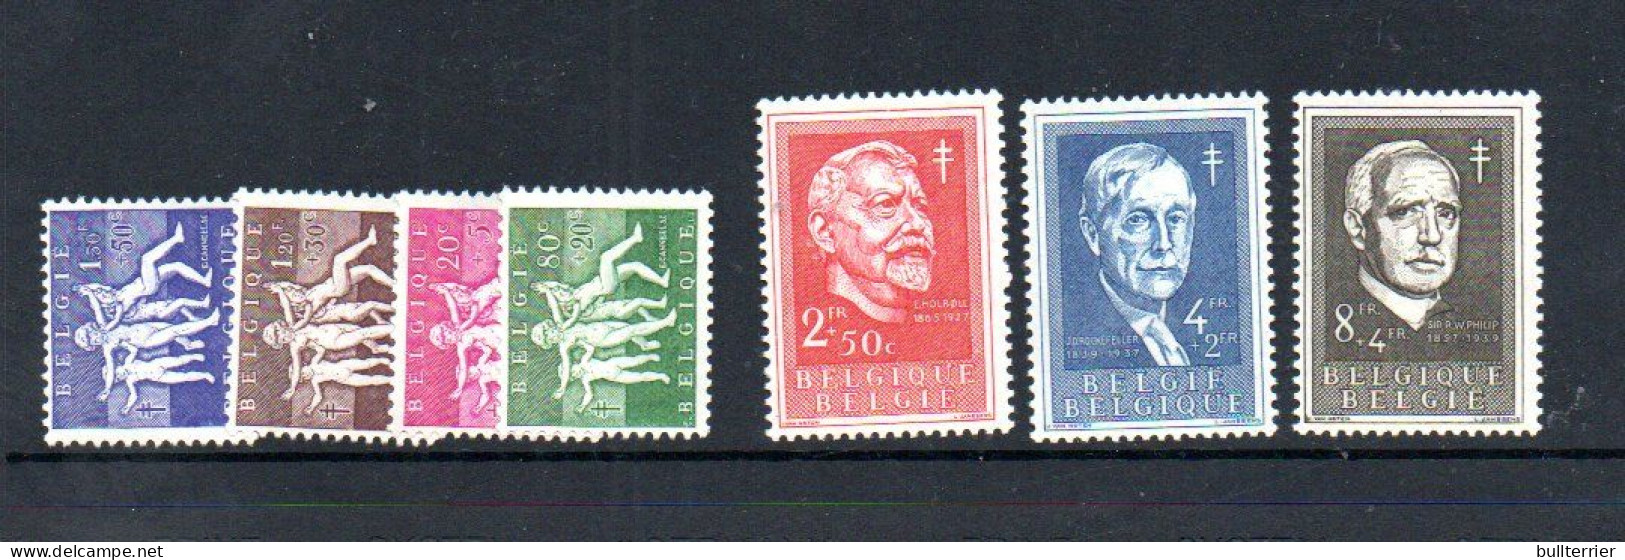 BELGIUM - 1955  - ANTB FUNDS SET OF 7  MINT NEVER HINGED , SG CAT £90+ - Nuevos